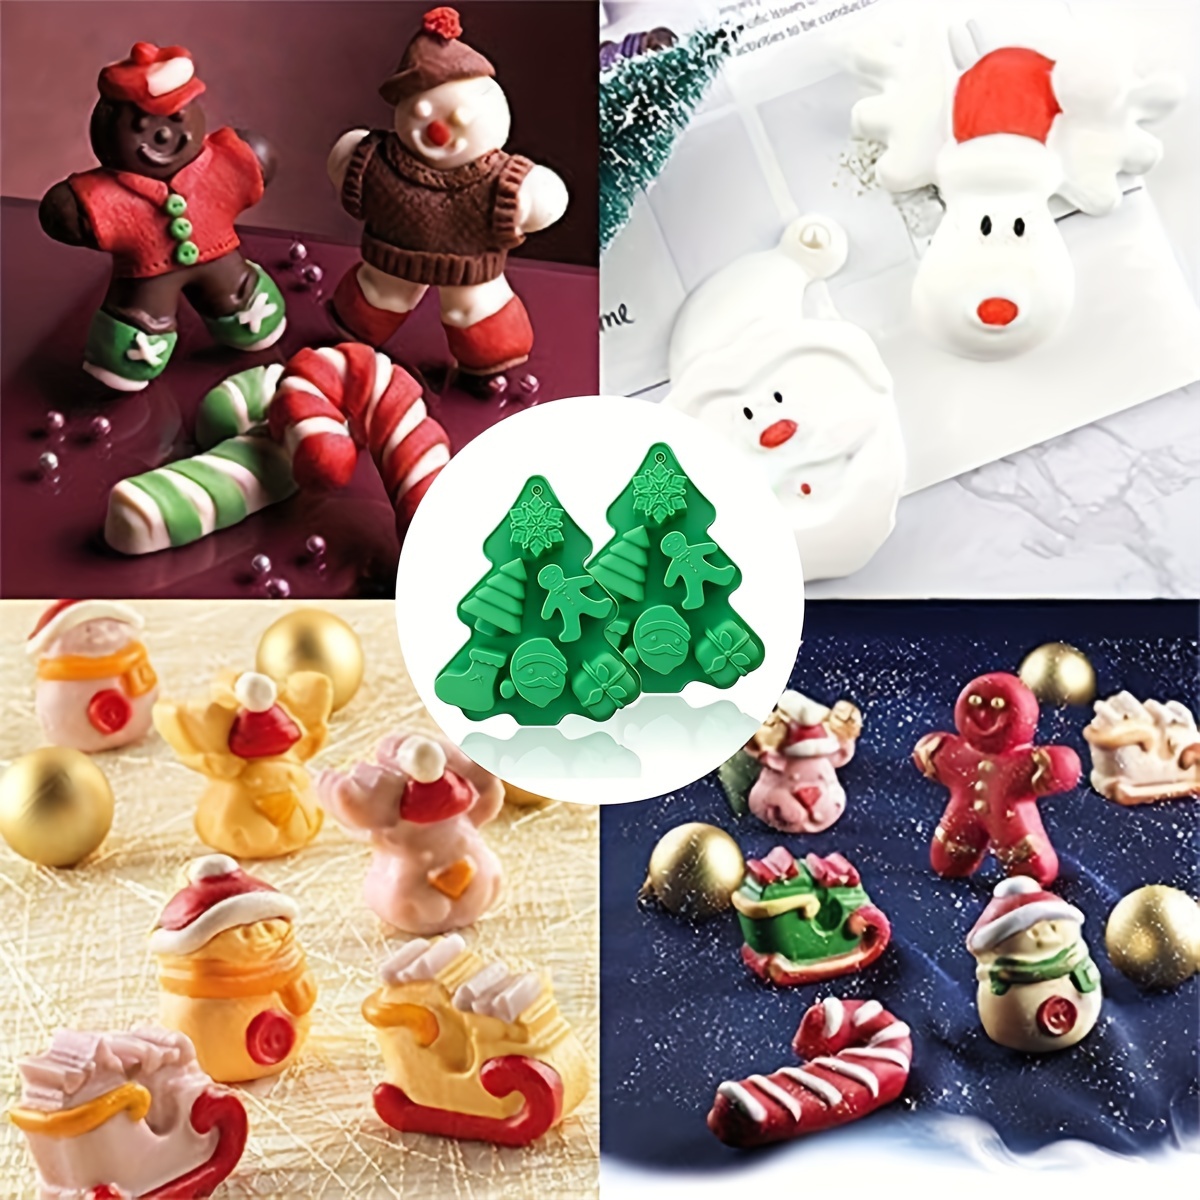 2pcs Christmas Shaped Silicone Baking Molds, Non-stick Silicone Cake Molds, Baking  Pans For Cakes And Muffins, Suitable For Kitchen Diy Baking Tools